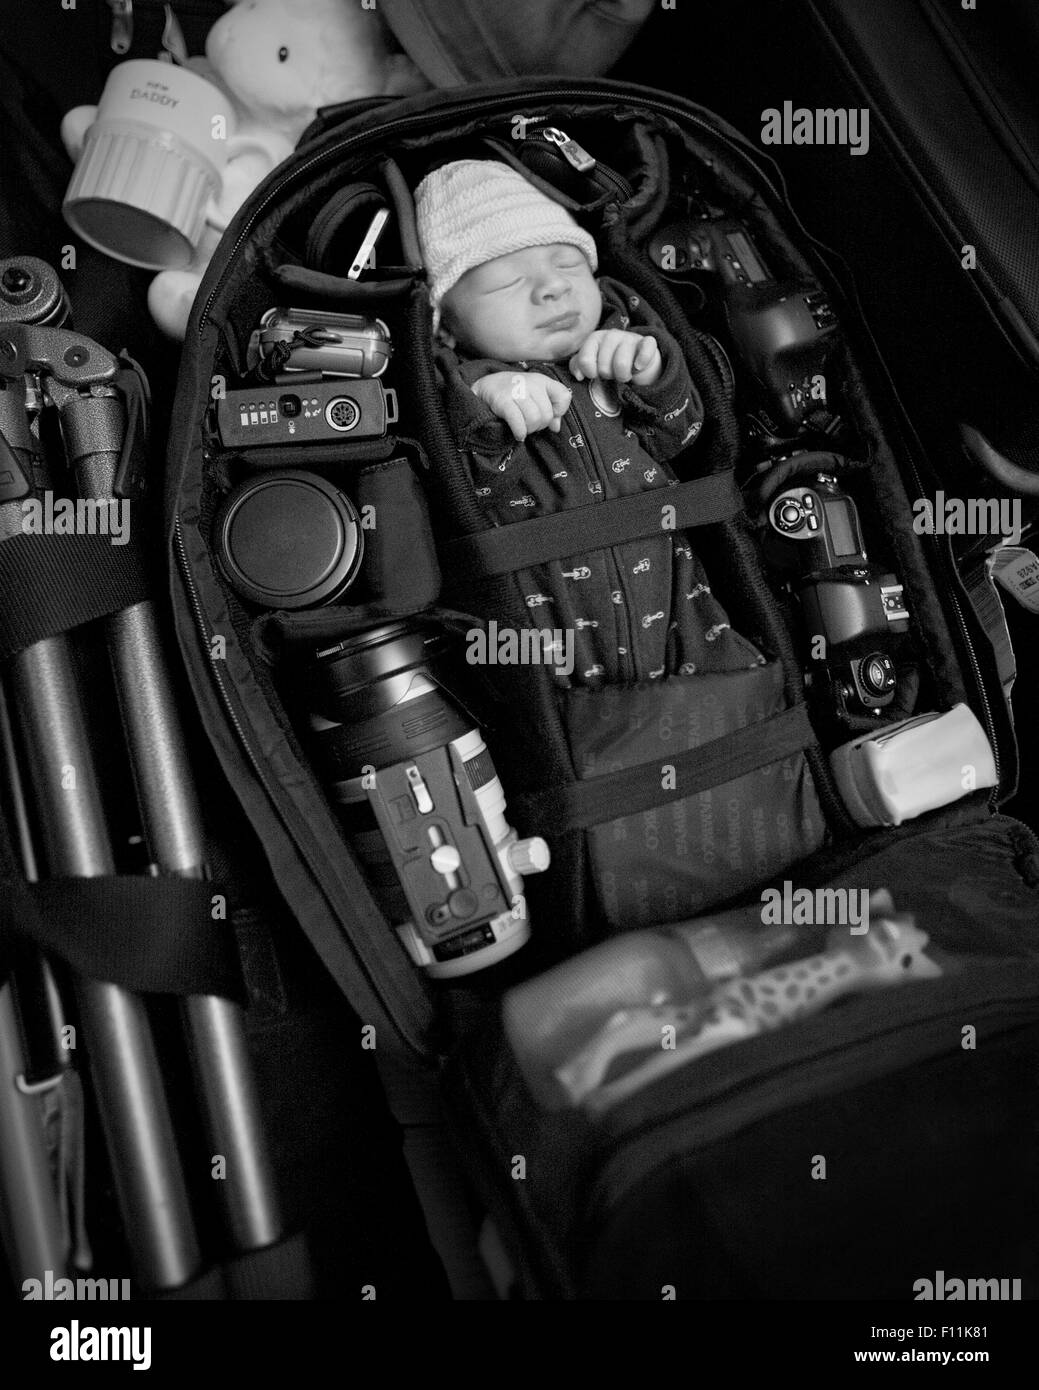 Caucasian infant packed into camera bag Stock Photo